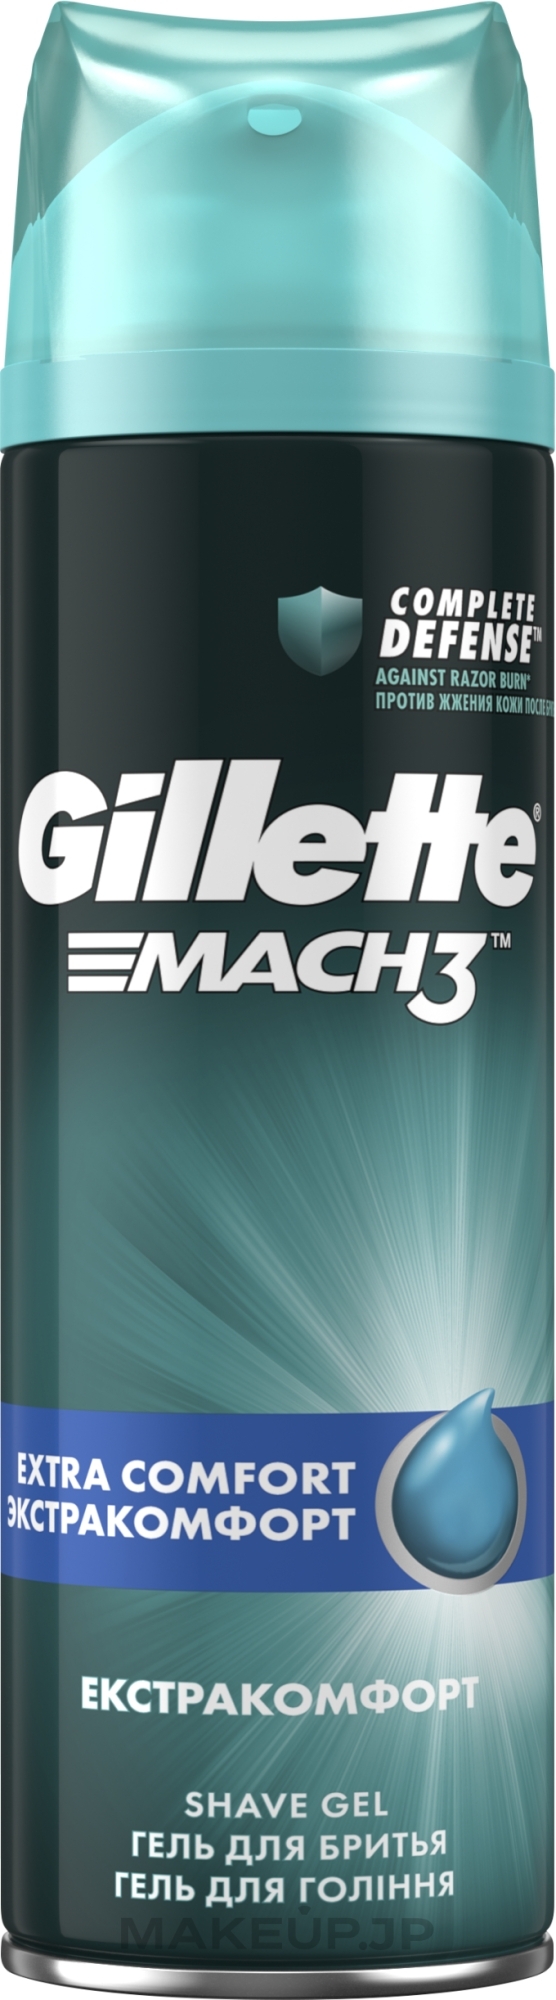 Shaving Gel "Soothing" - Gillette Mach 3 Complete Defense Extra Comfort — photo 200 ml